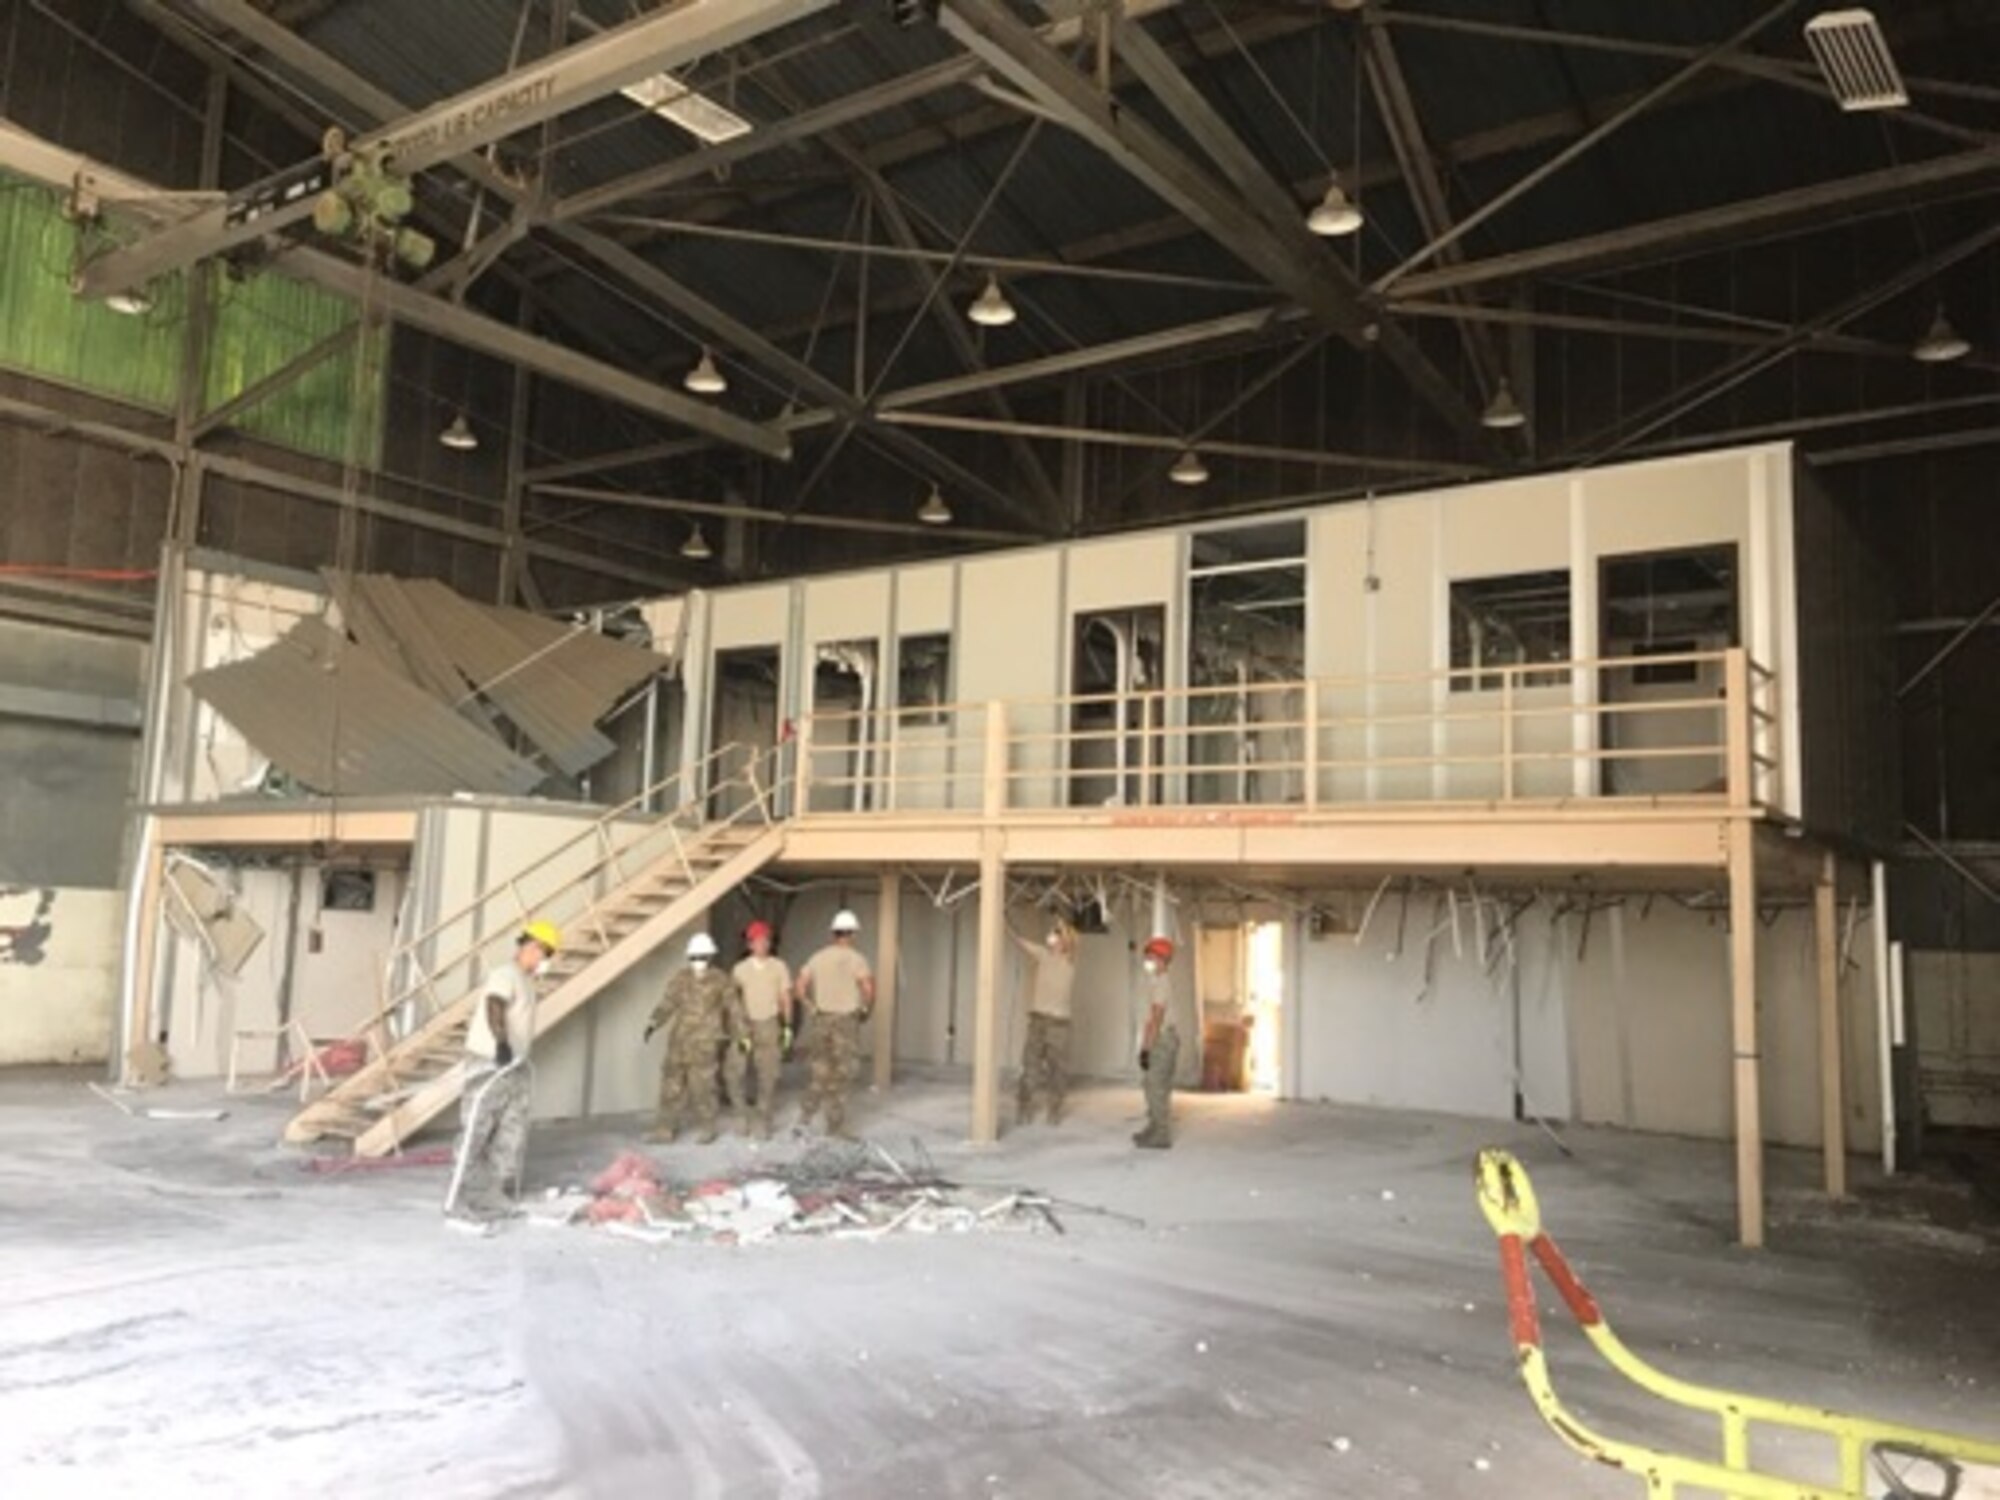 Airmen from the 60th Civil Engineer Squadron demolish old mobile offices inside Building 844 at Travis Air Force Base, California, July 2, 2019. The refurbished hangar houses the new Nose Dock Gym, facilitated through existing base funds, equipment donations and volunteer work by the 60th Mission Support Group. (U.S. Air Force courtesy photo)